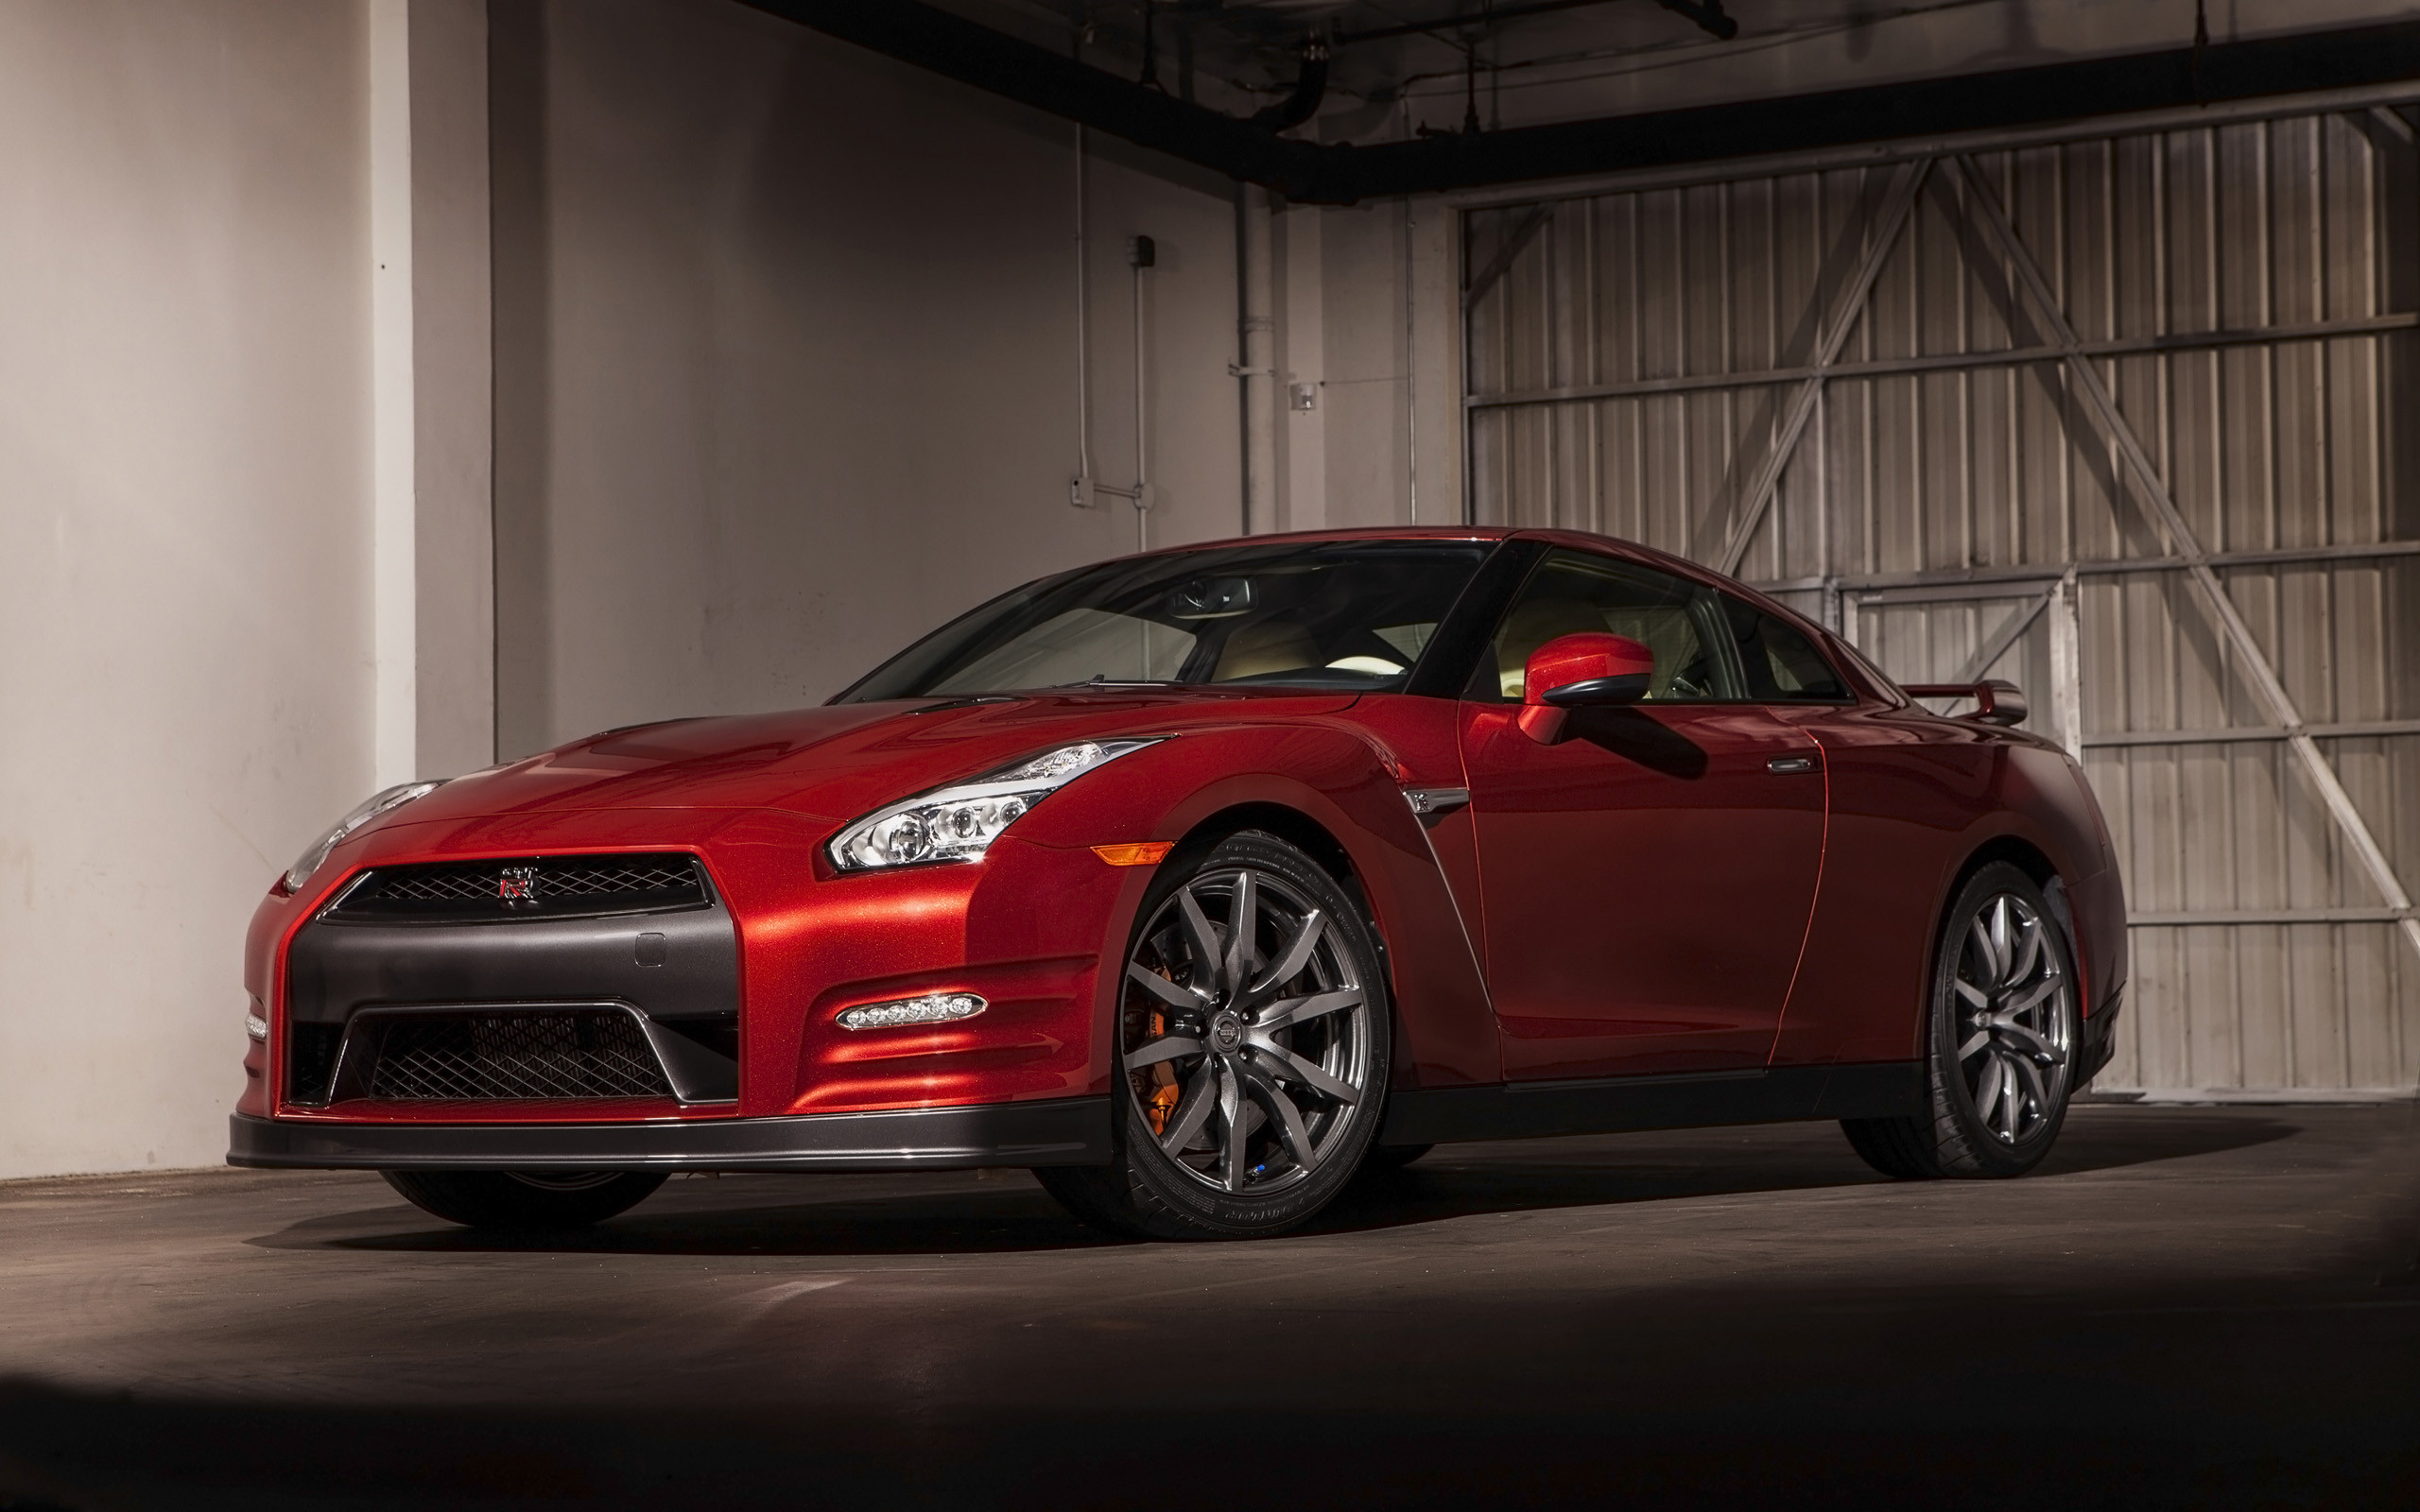 2560x1600 2015 Nissan GT-R Review Specs : Impressive Nissan Gt R 2015 Wallpapers  Recent Collection